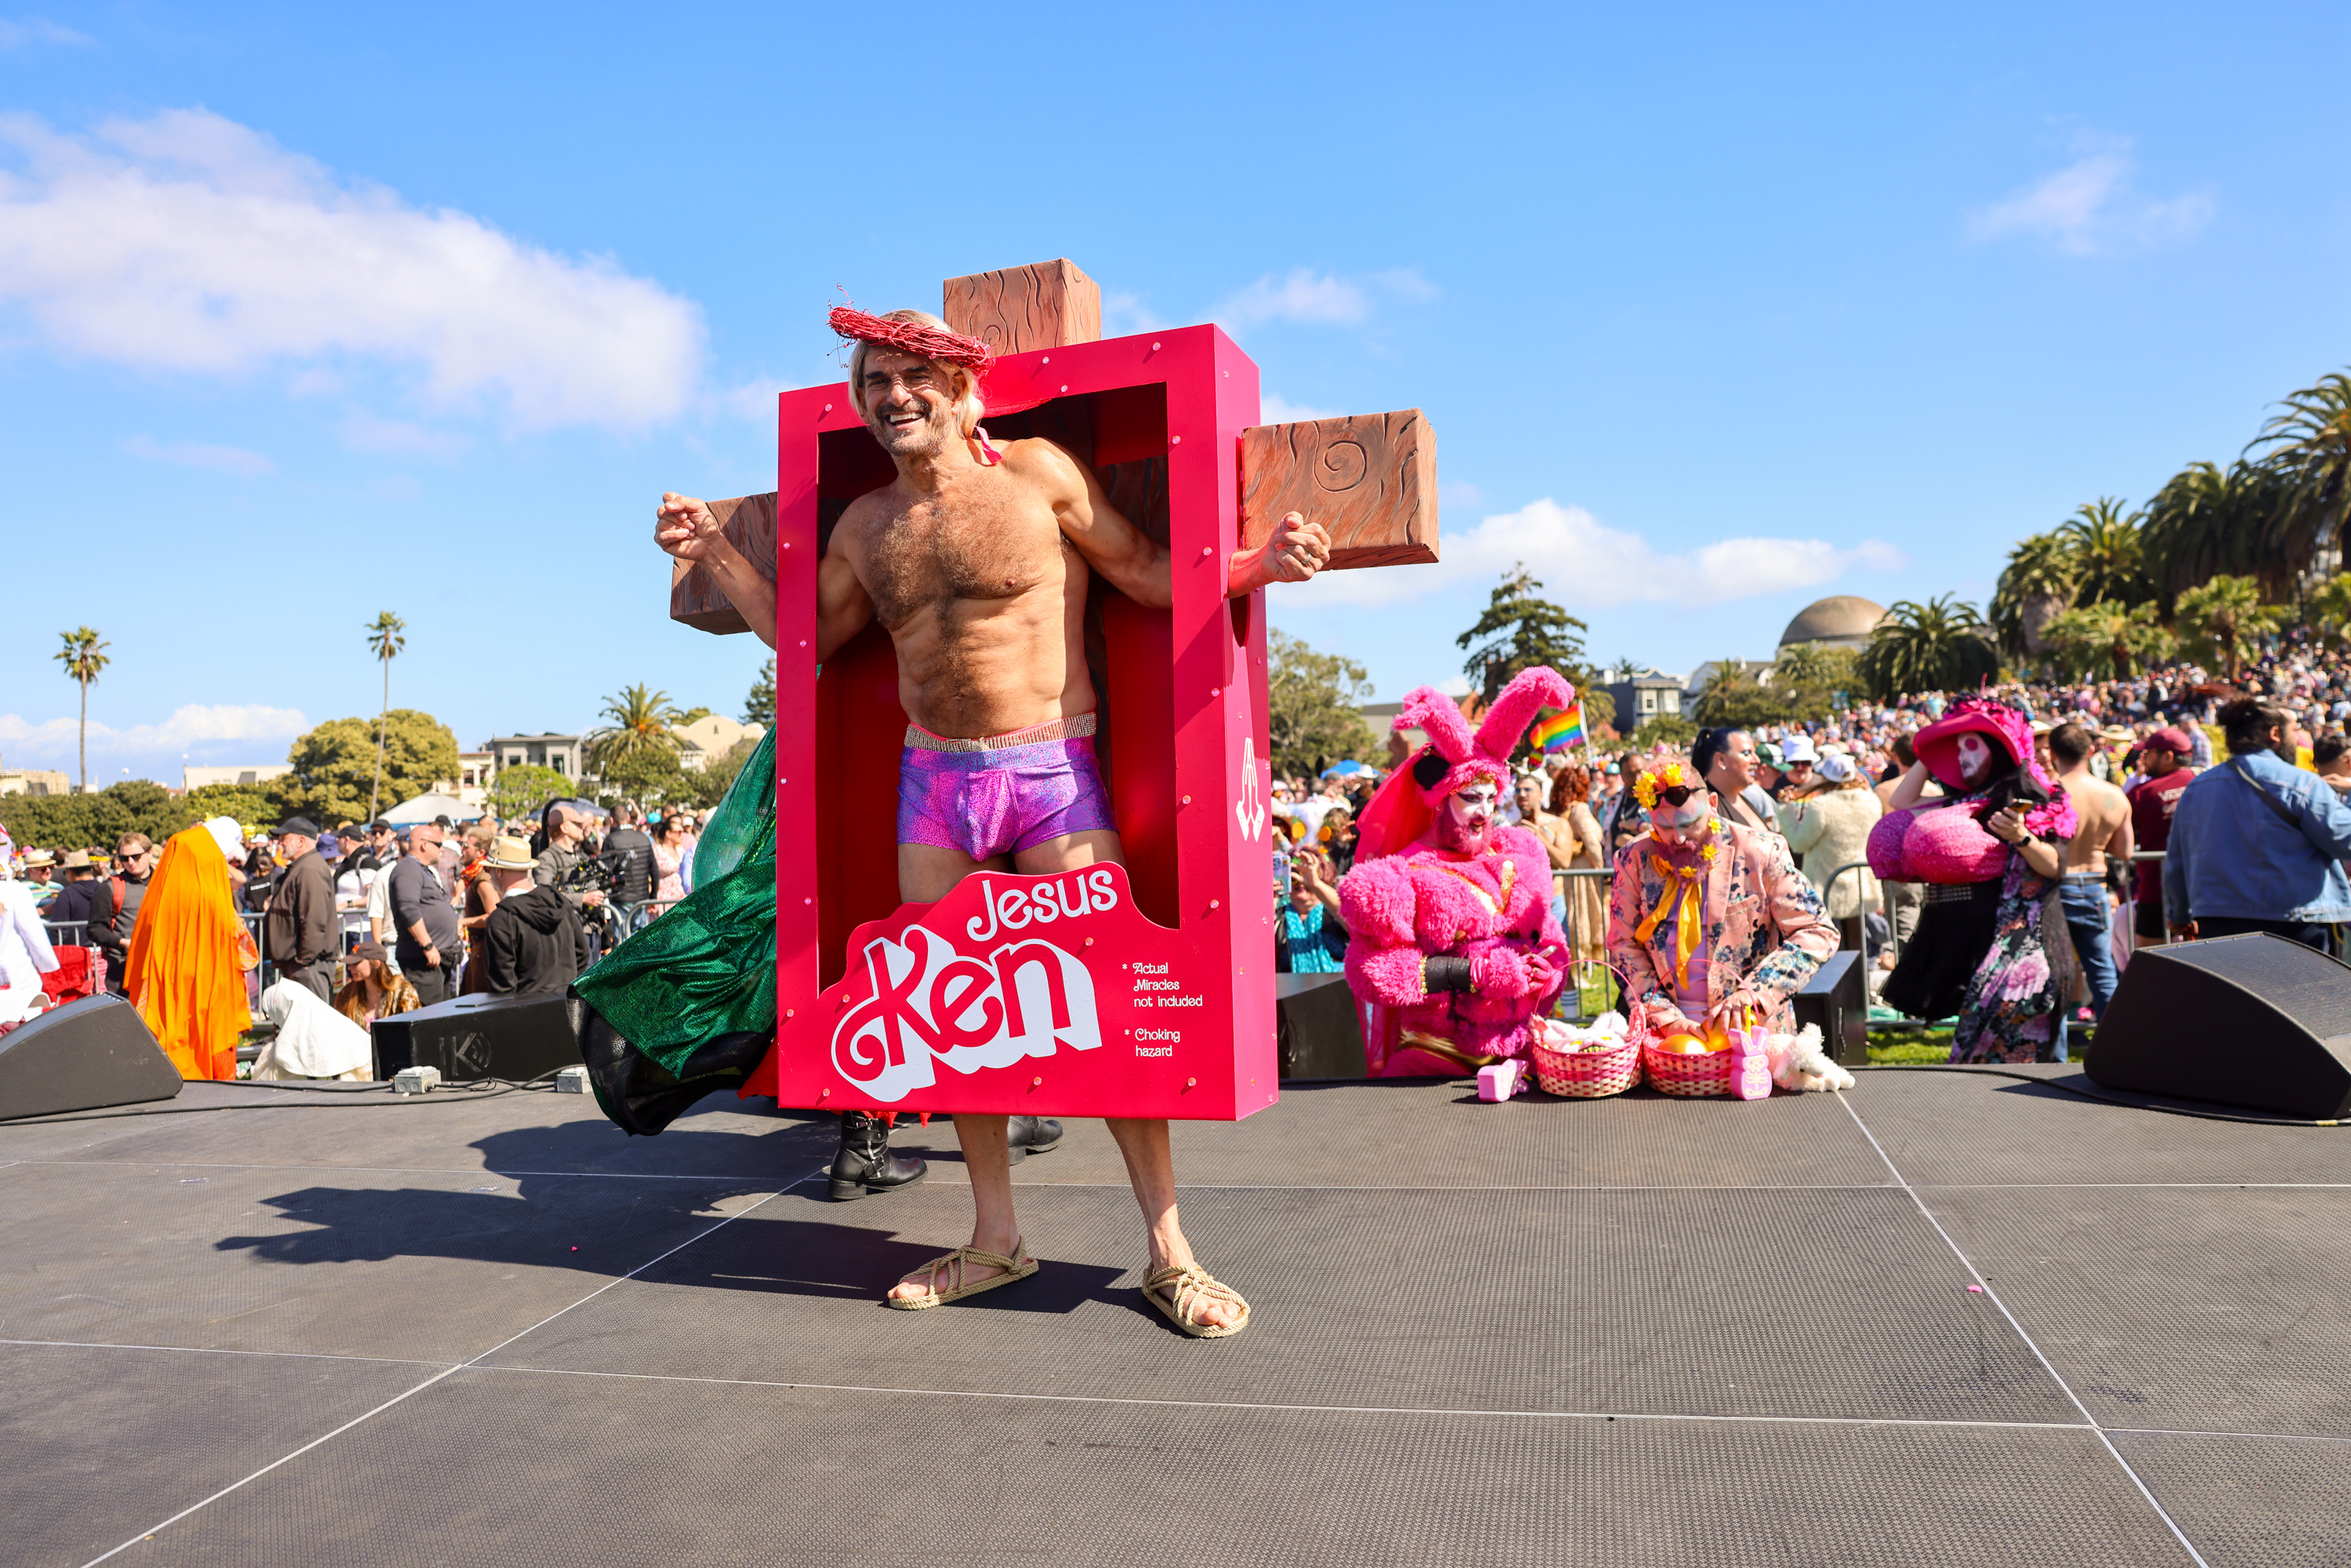 A man in pink shorts pops out of a box labeled &quot;Jesus Ken,&quot; on stage at a festive event with costumed people around.